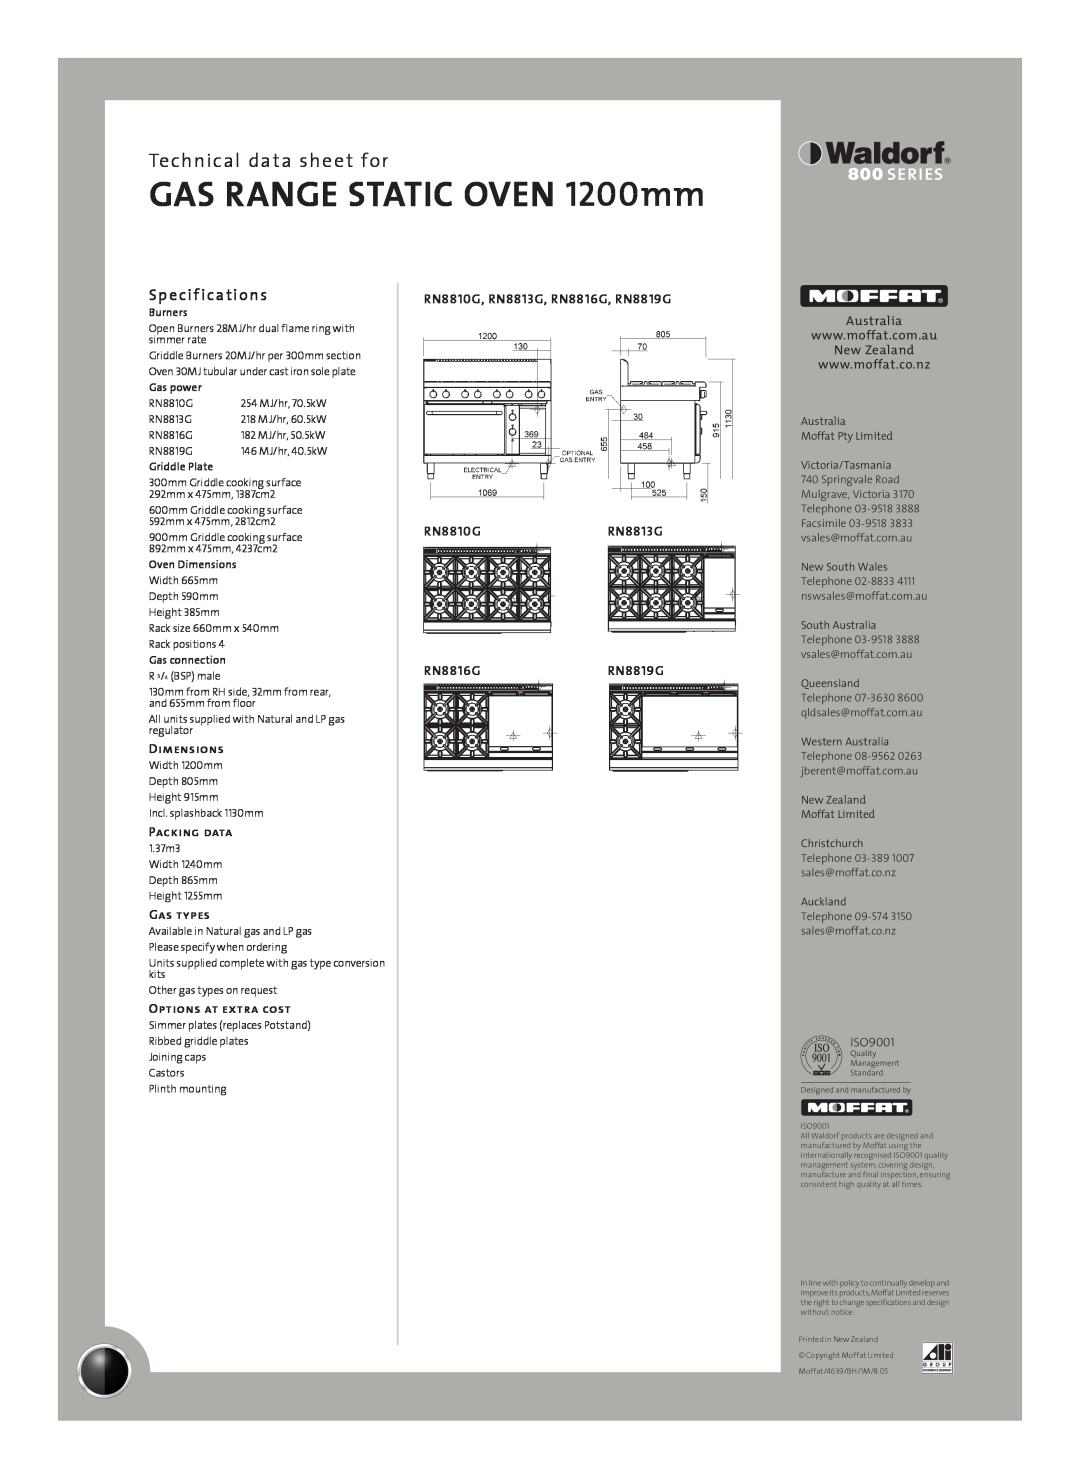 Moffat RN8819G manual Sp e cif ications, GAS RANGE STATIC OVEN 1200mm, Technical data sheet for, Dimensions, Packing data 